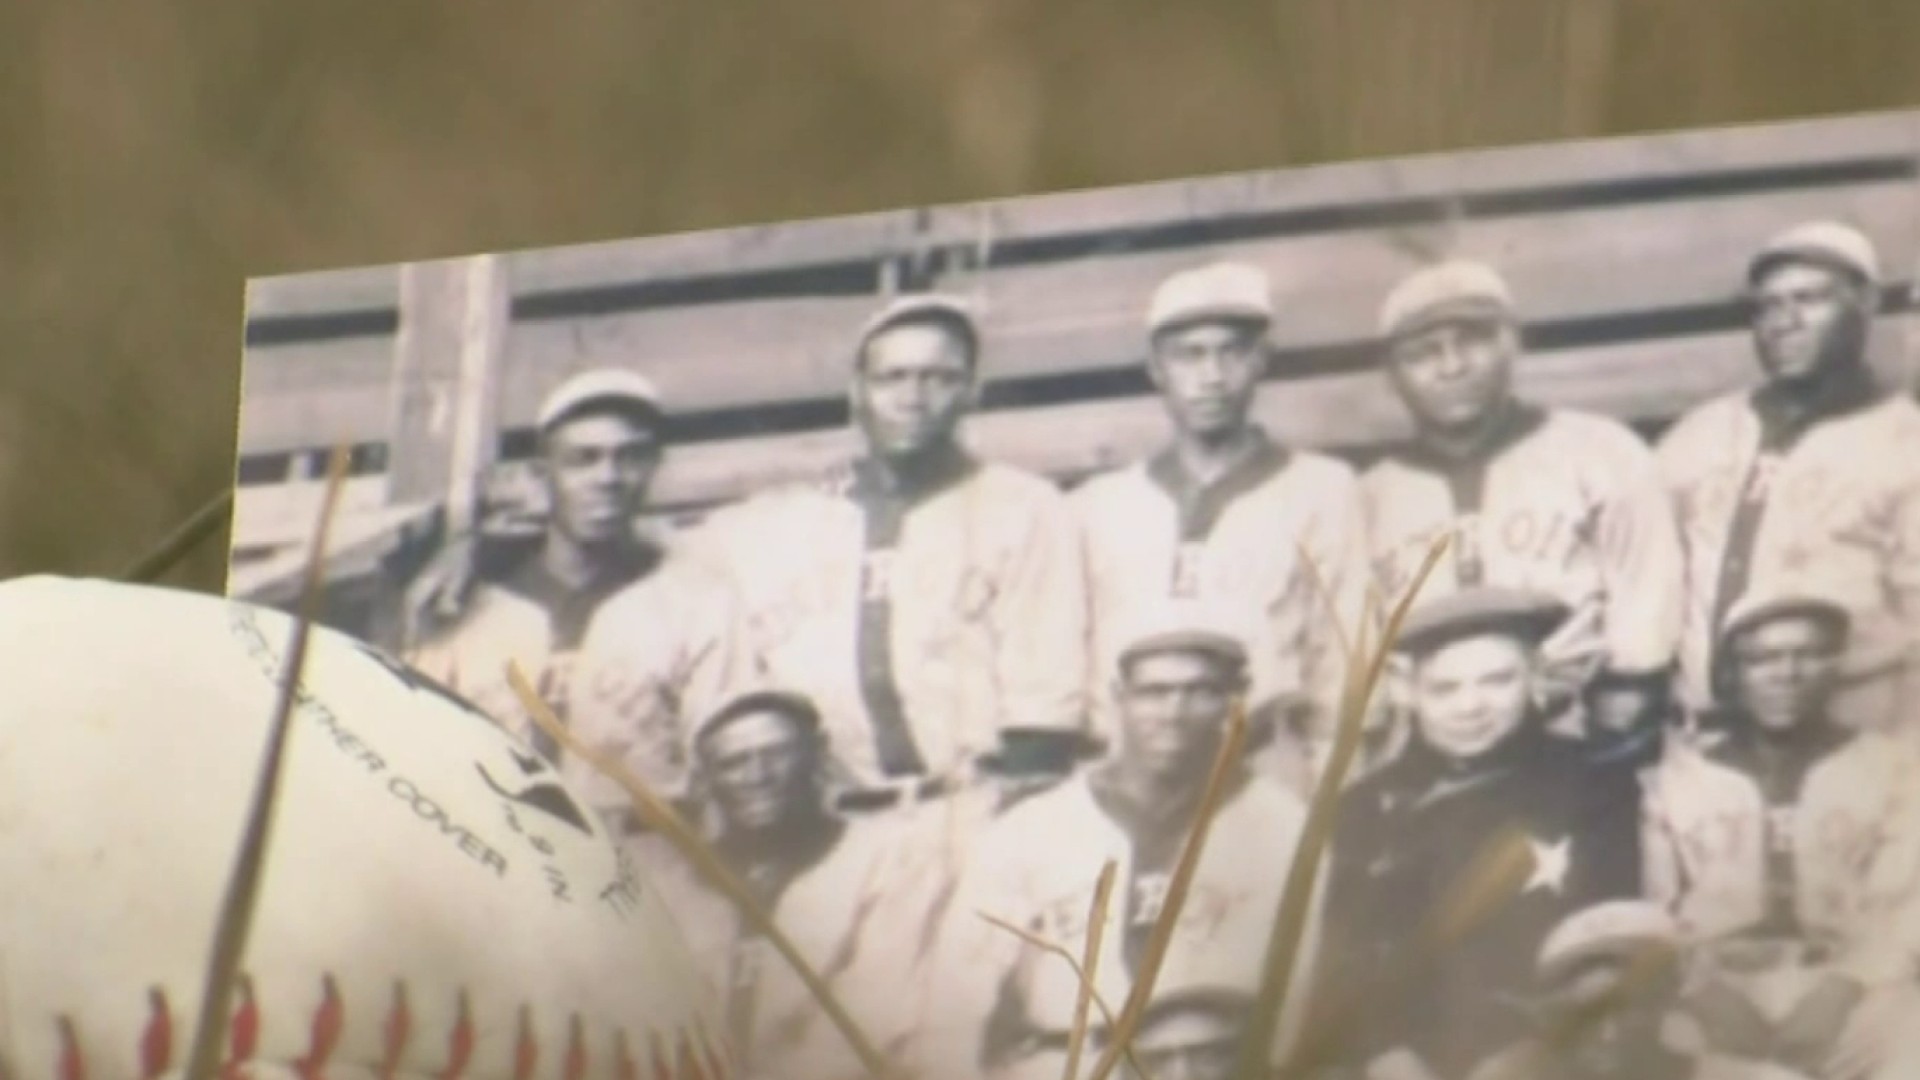 Long overdue': Negro Leagues now part of Major League Baseball, stats  counted in MLB records